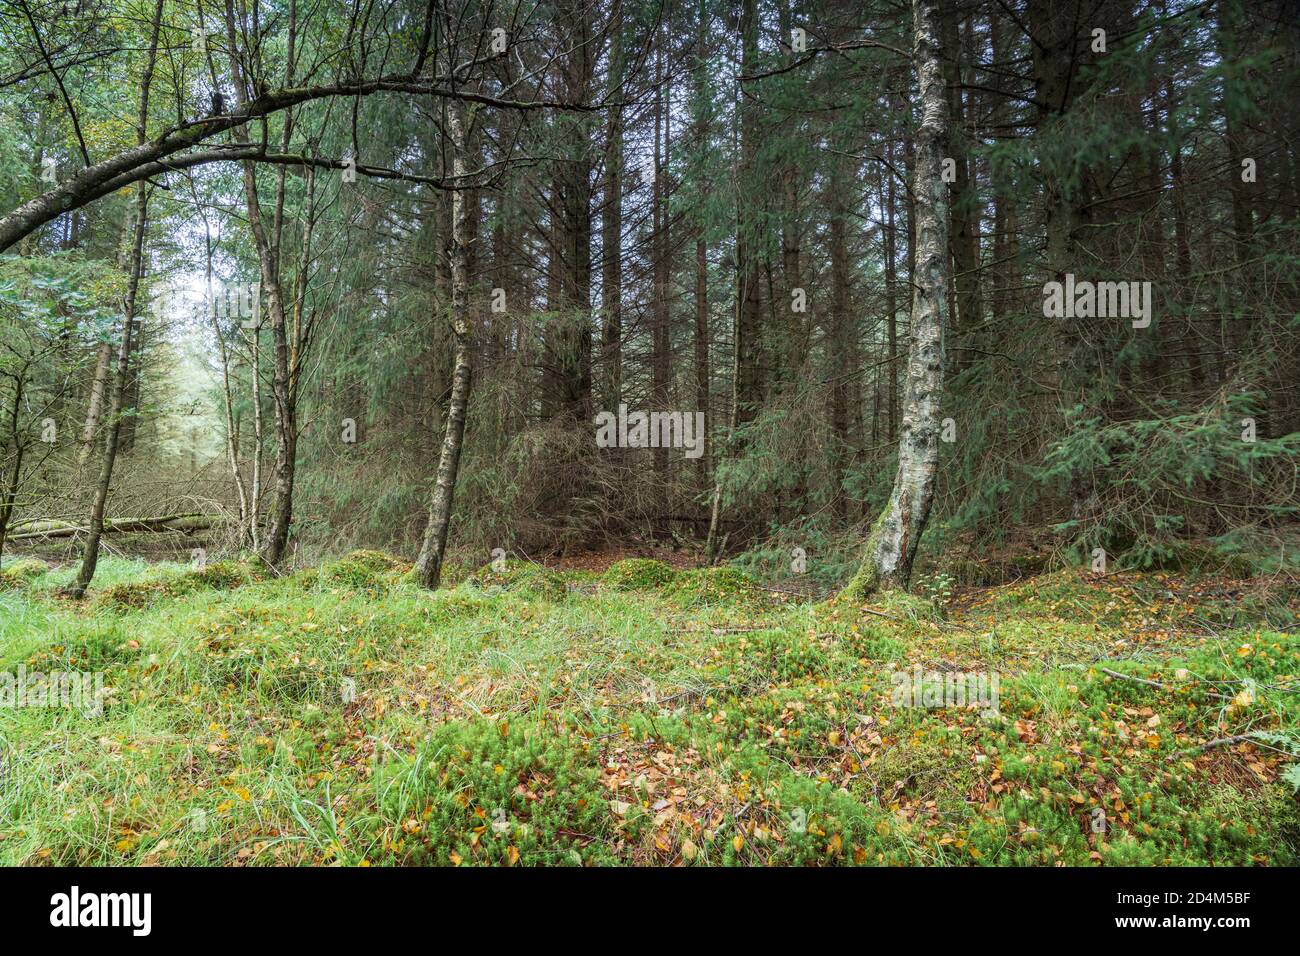 An autumnal landscape HDR image of moss covered ground in Kielder Forest in Northumberland, England. 09 September 2020 Stock Photo